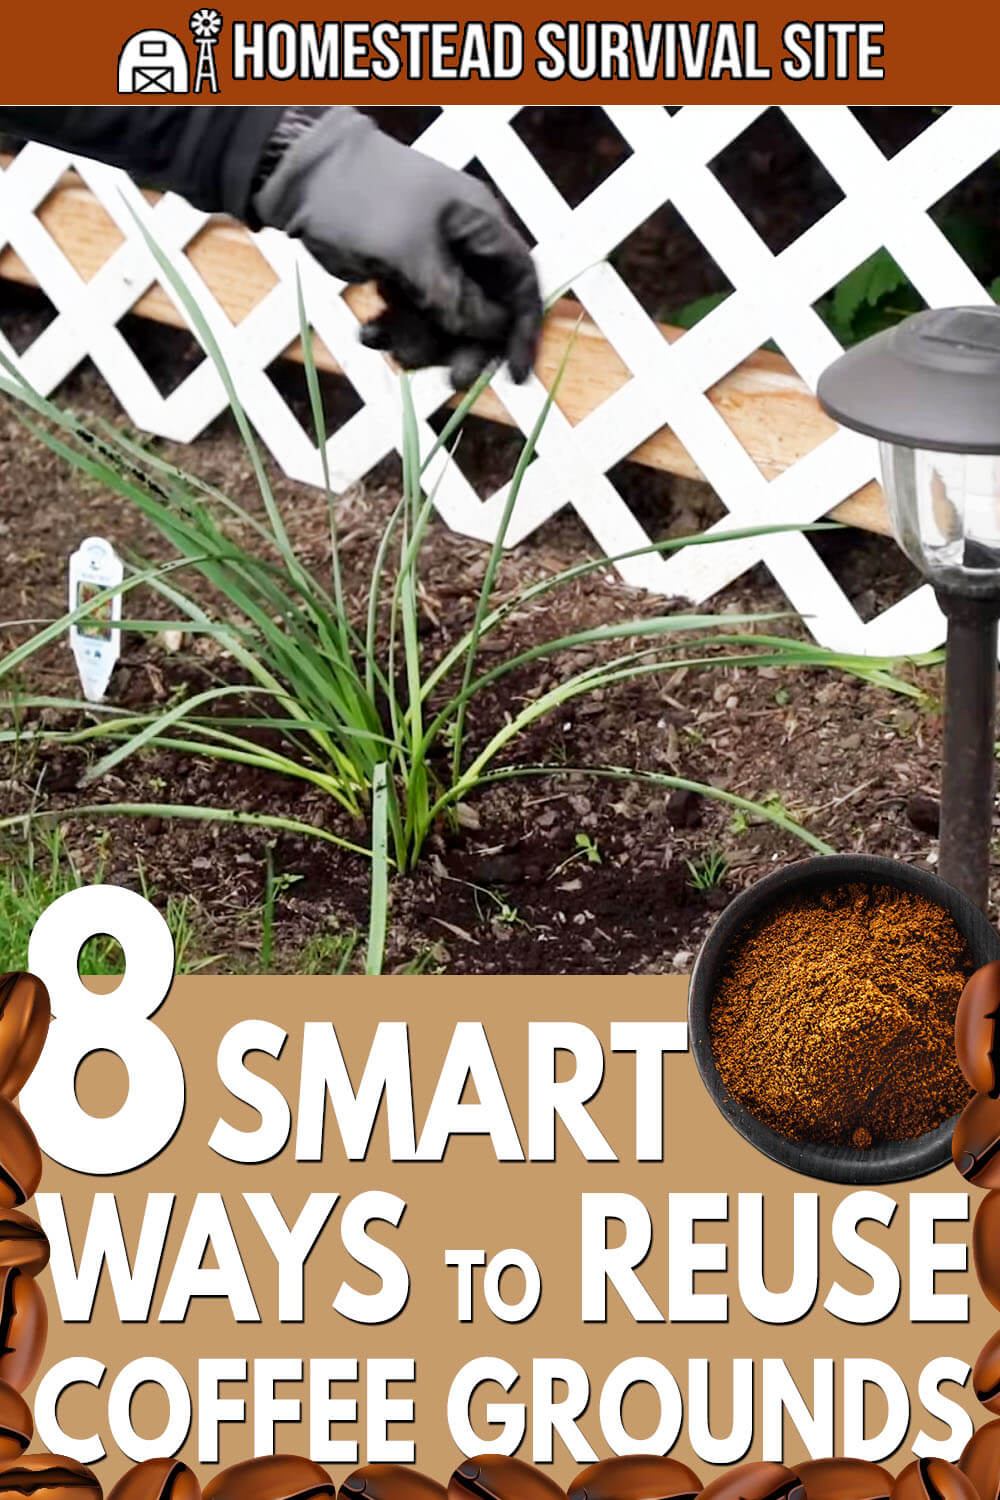 8 Smart Ways to Reuse Coffee Grounds